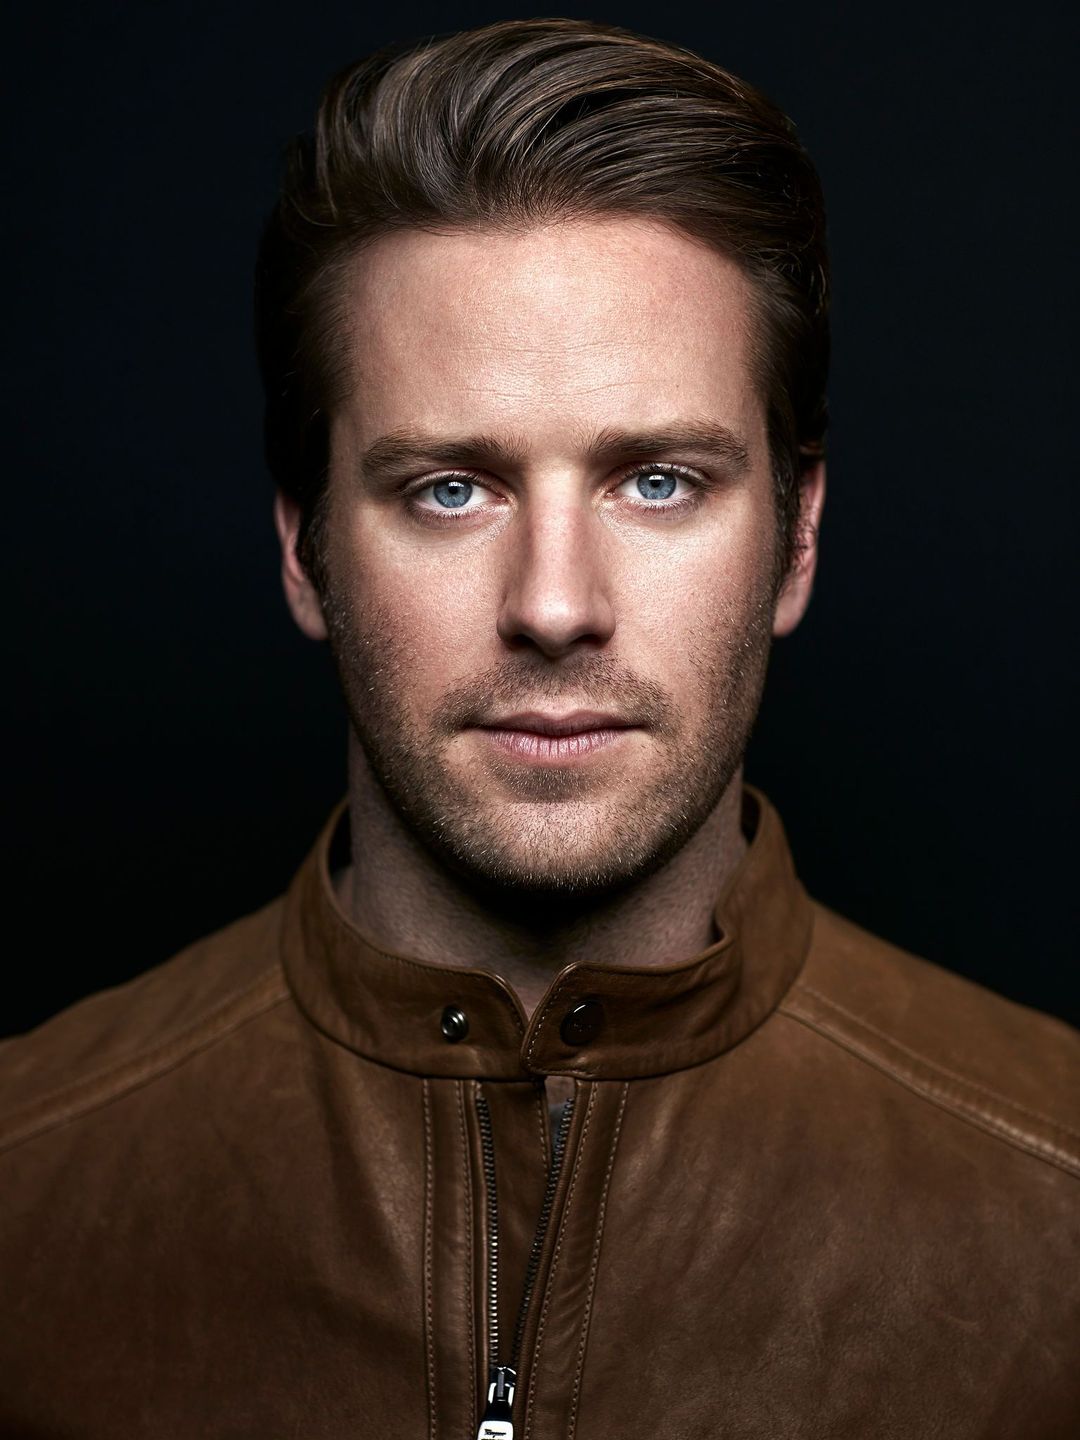 Armie Hammer who are his parents